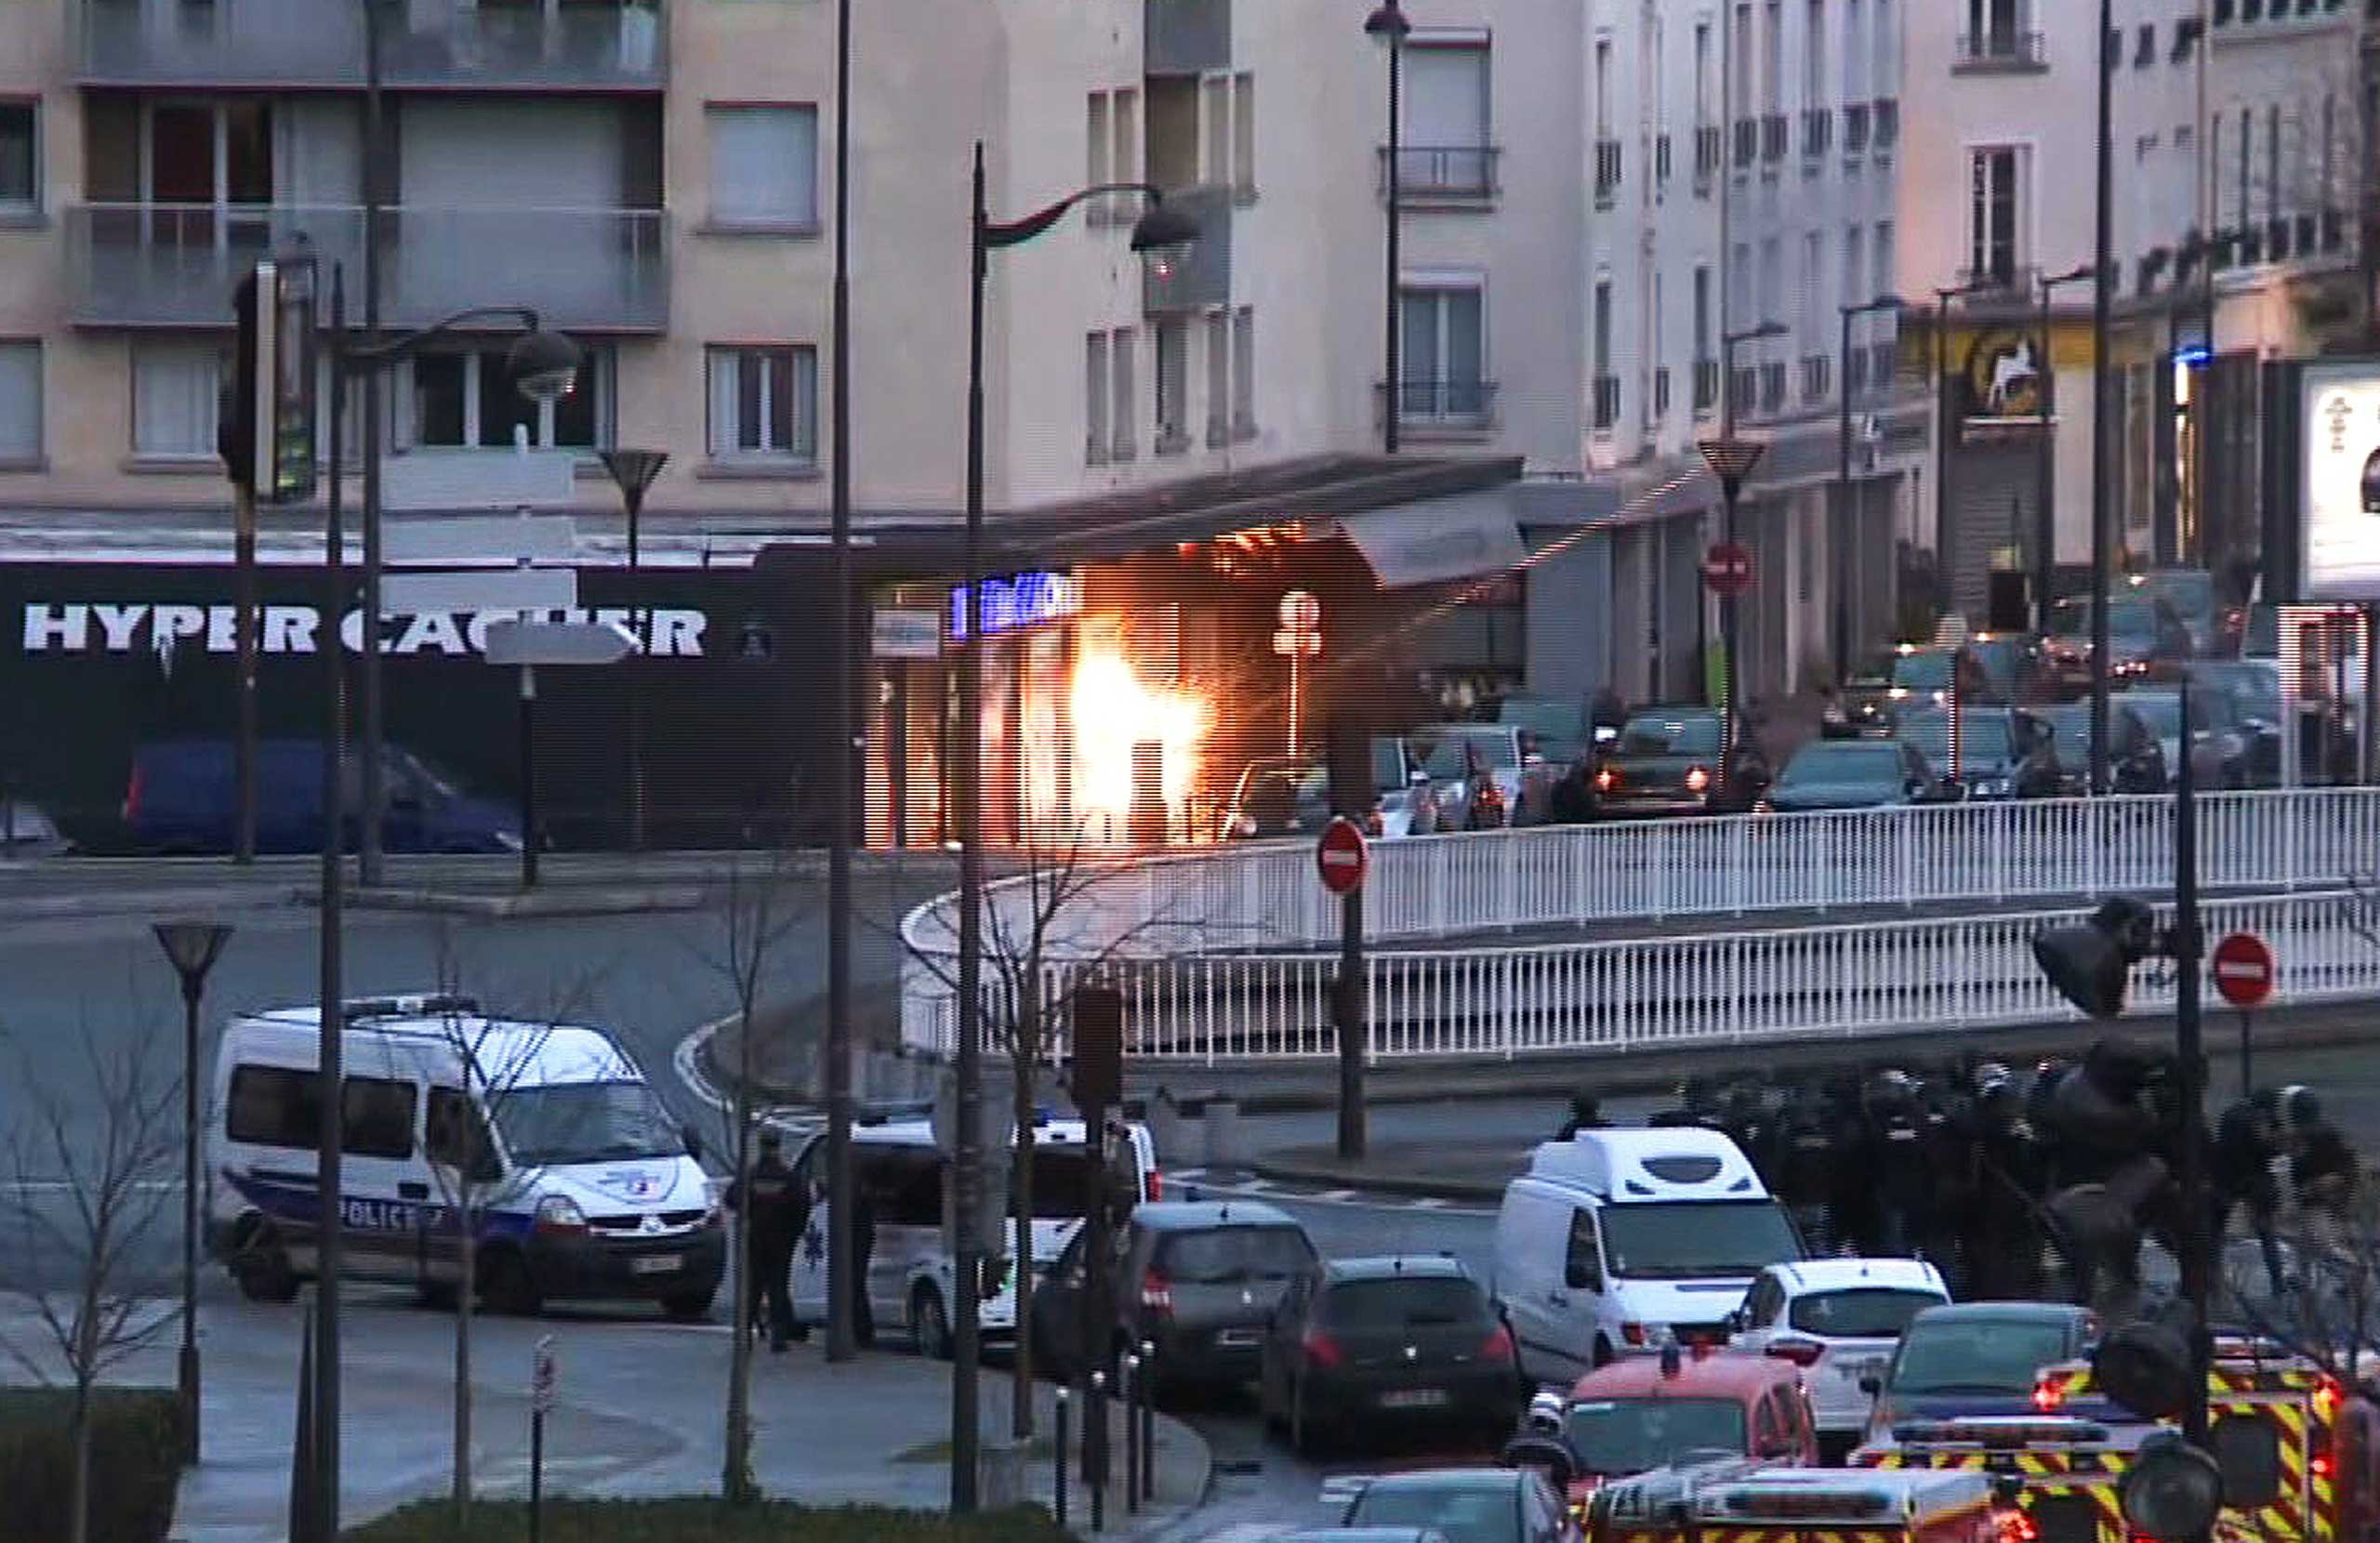 A screengrab taken from an AFP TV video shows a general view of members of the French police special forces launching the assault at a kosher grocery store in Porte de Vincennes, eastern Paris, on Jan. 9, 2015. (Gabrielle Chatelain—AFP/Getty Images)